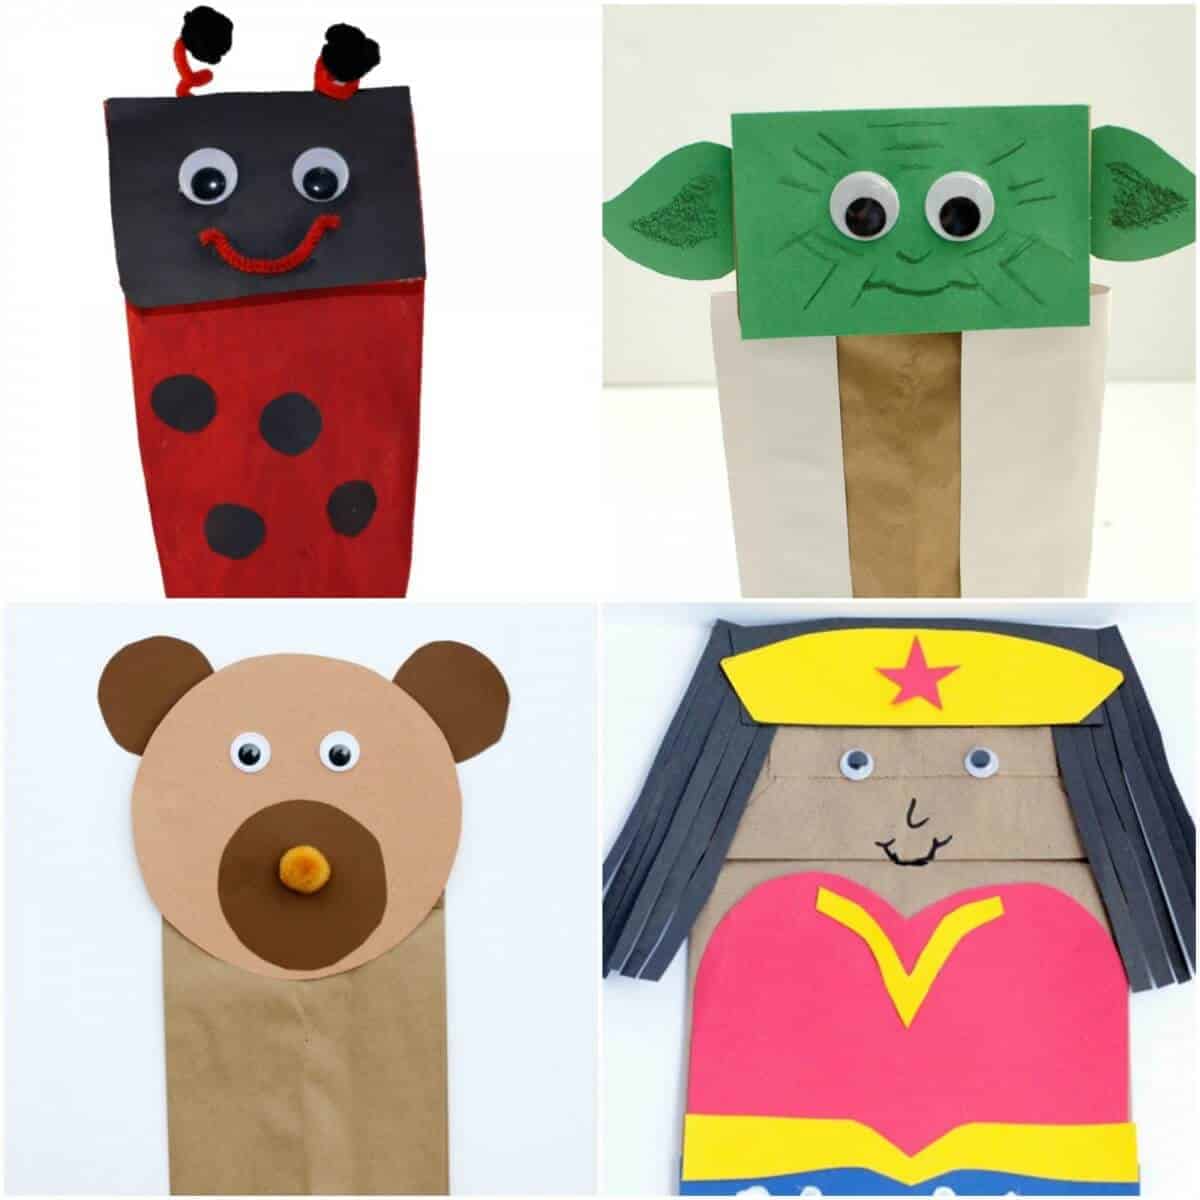 21 Easy And Simple Paper Bag Crafts · The Inspiration Edit